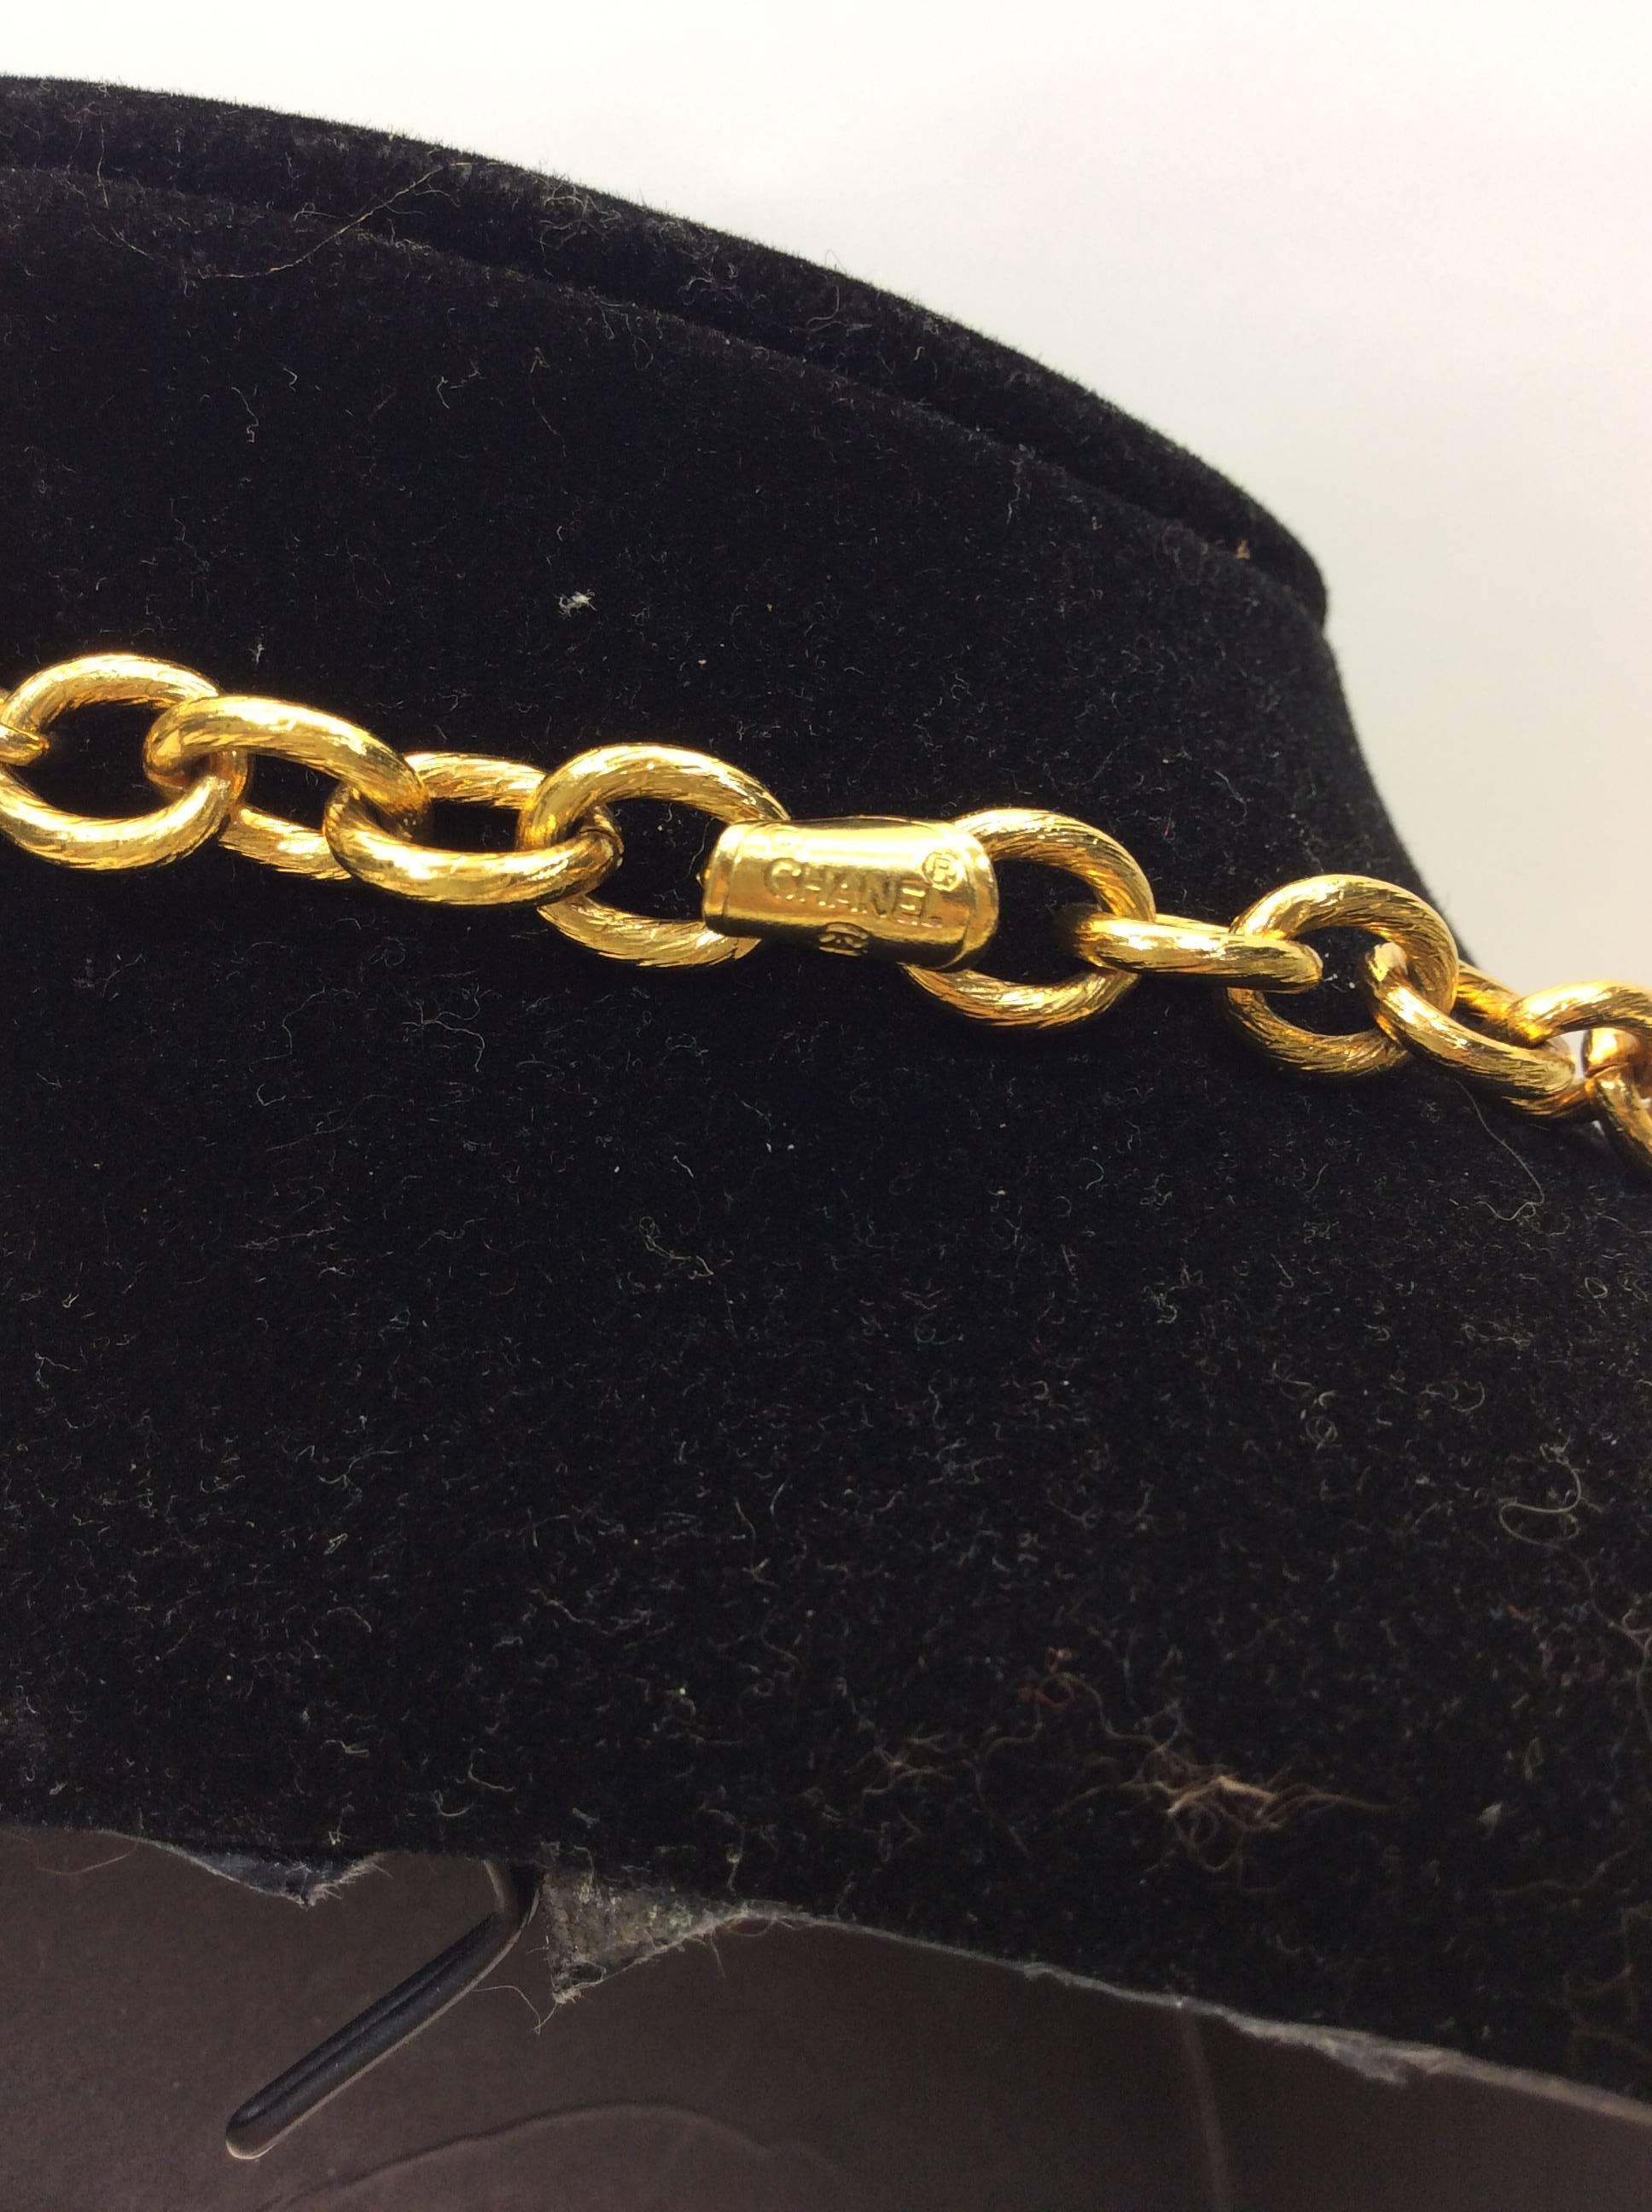 Chanel Gold Plated Charm Necklace In Excellent Condition For Sale In Narberth, PA